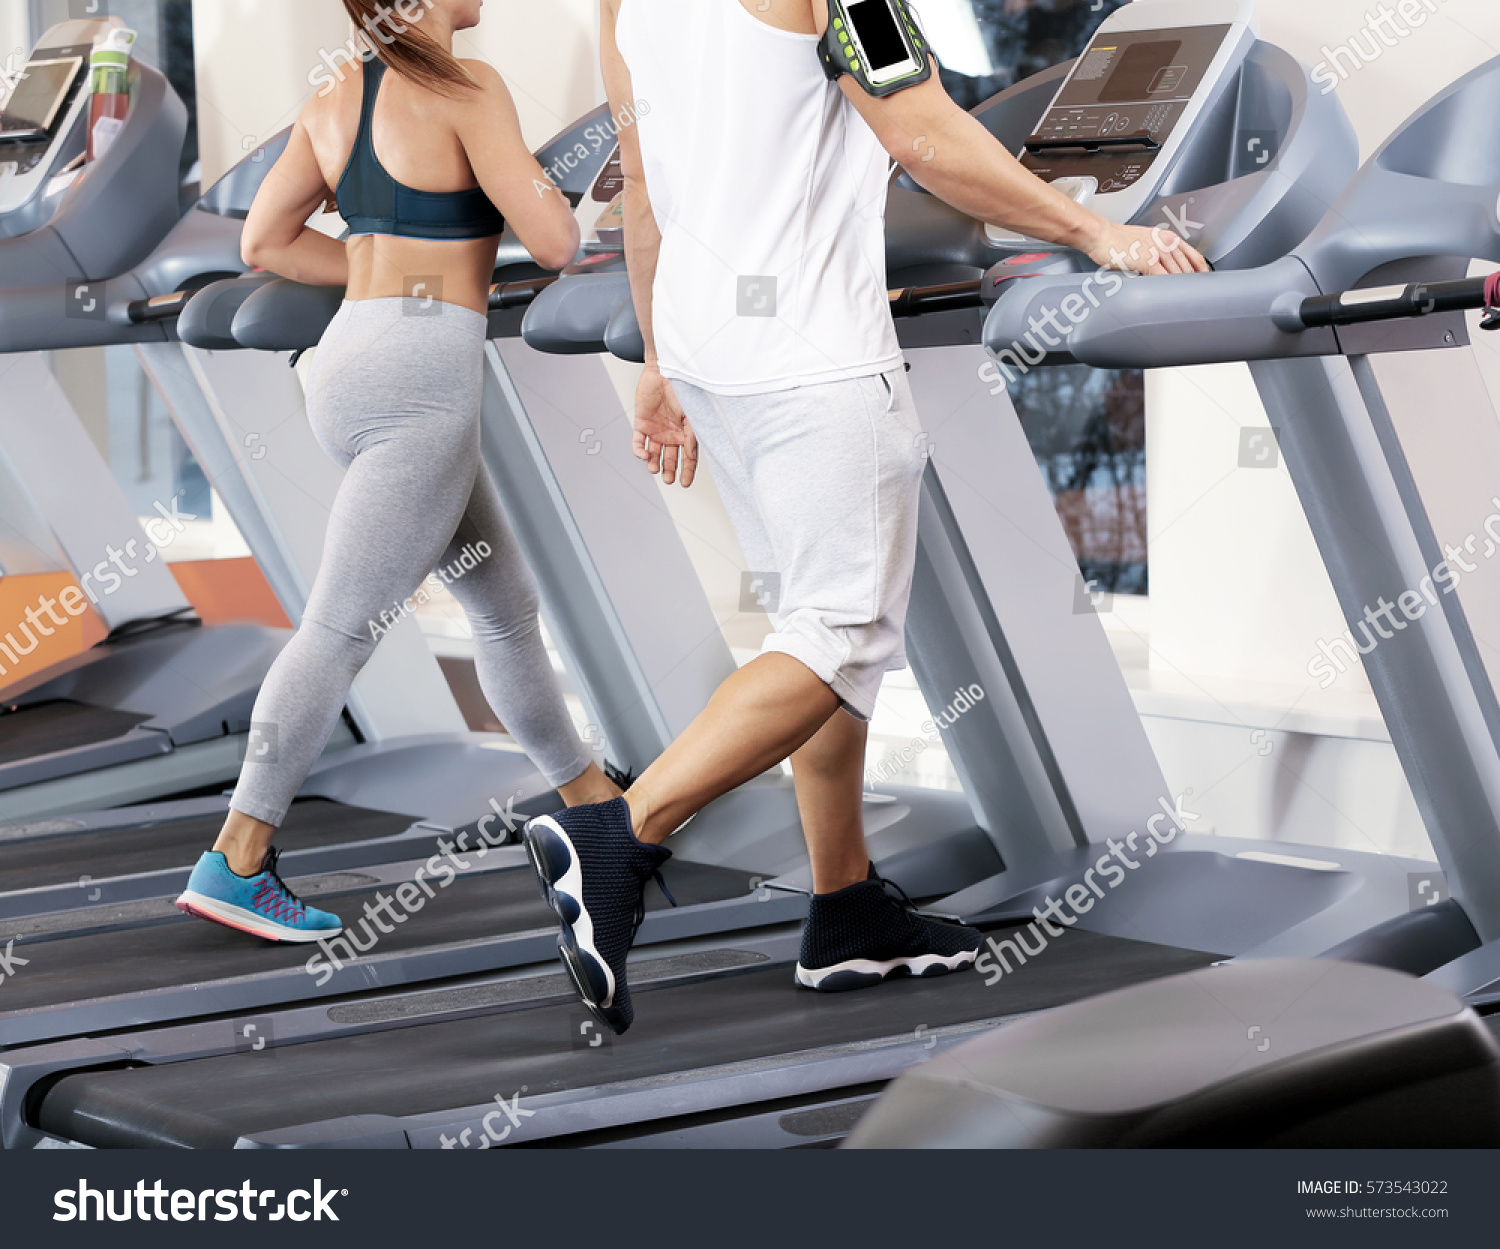 Young people running on treadmills in gym #573543022